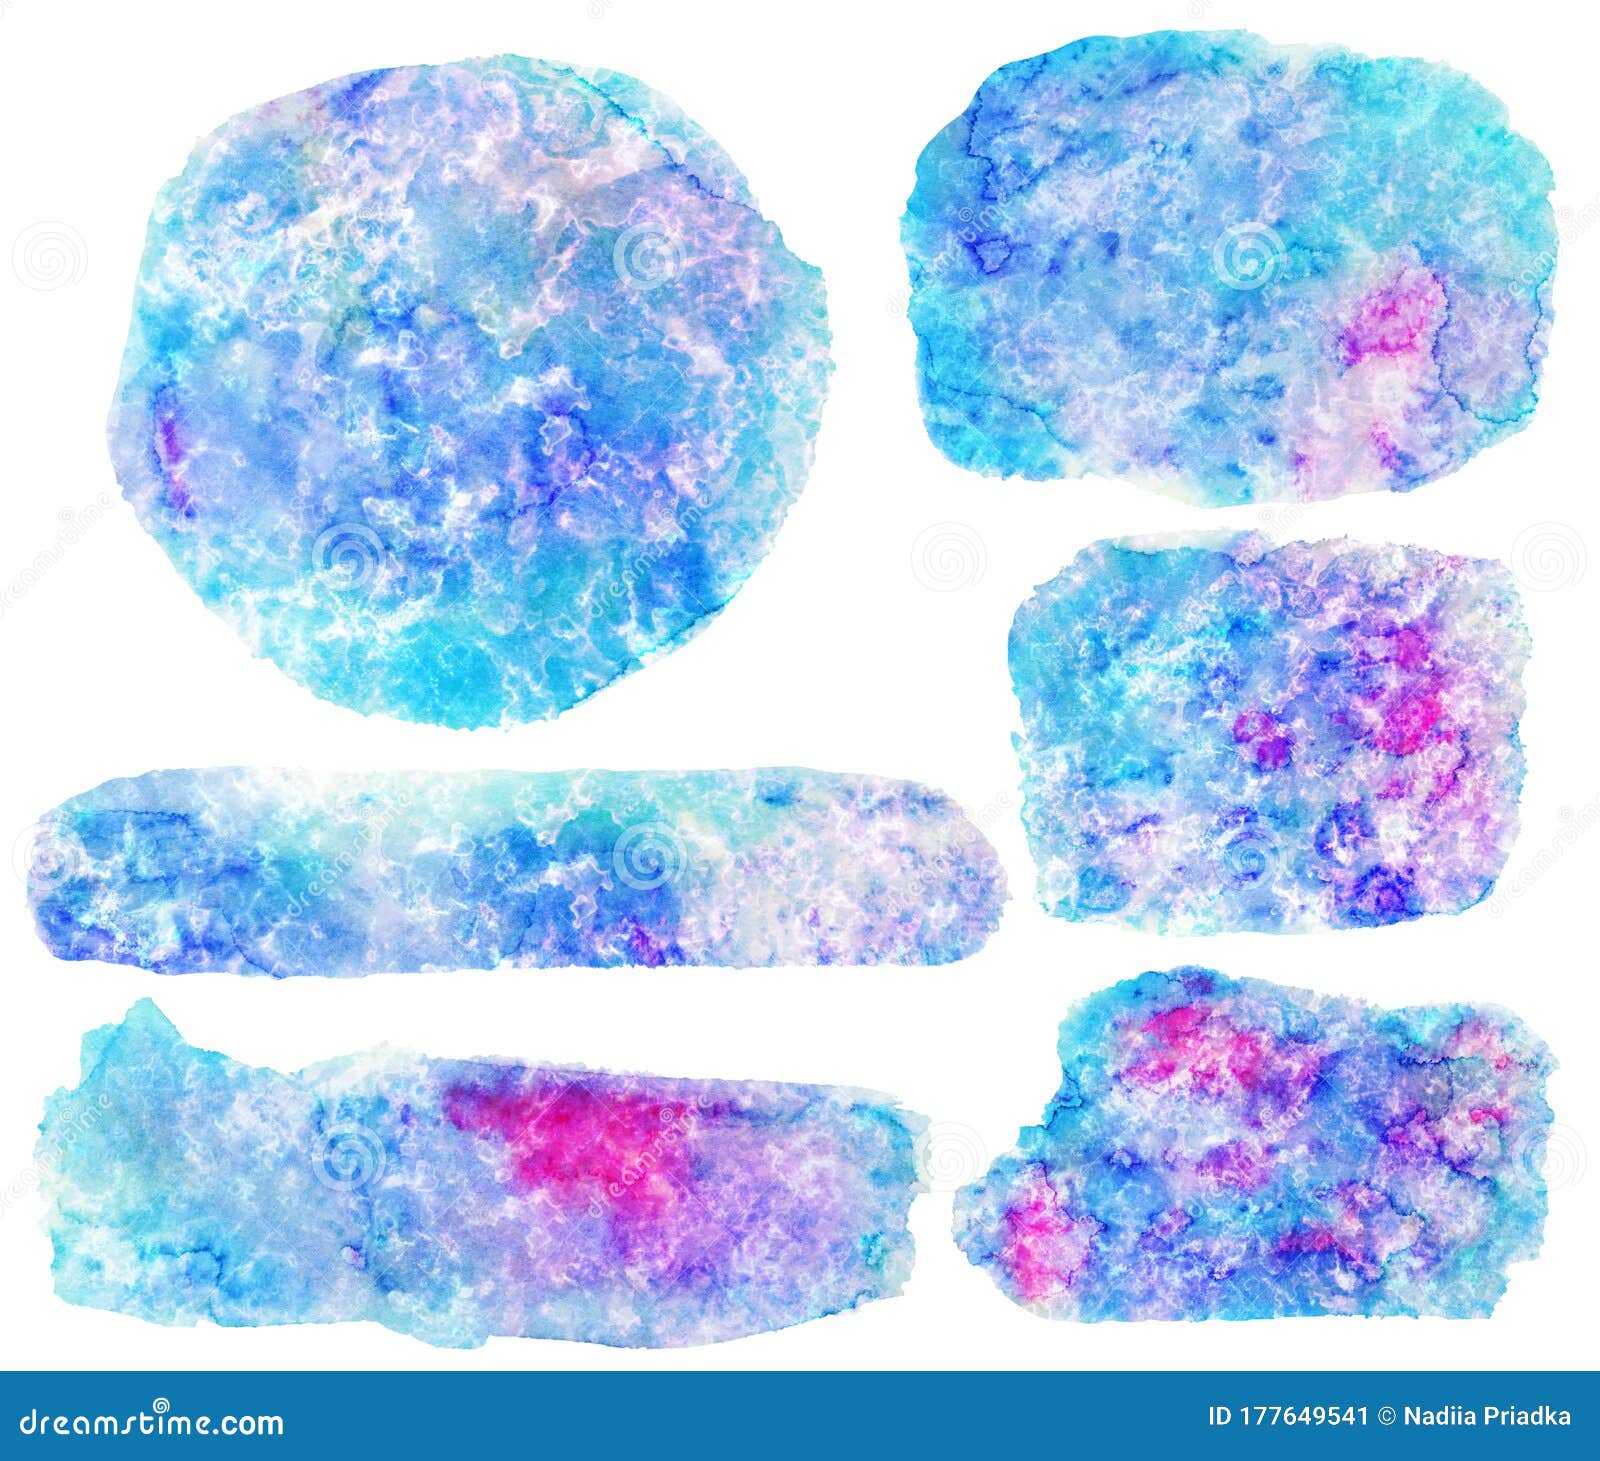 Paint Splat Stain Blot Spots Splashes Set Collection Isolated On White Small Bright Spot On An Object Or Painting